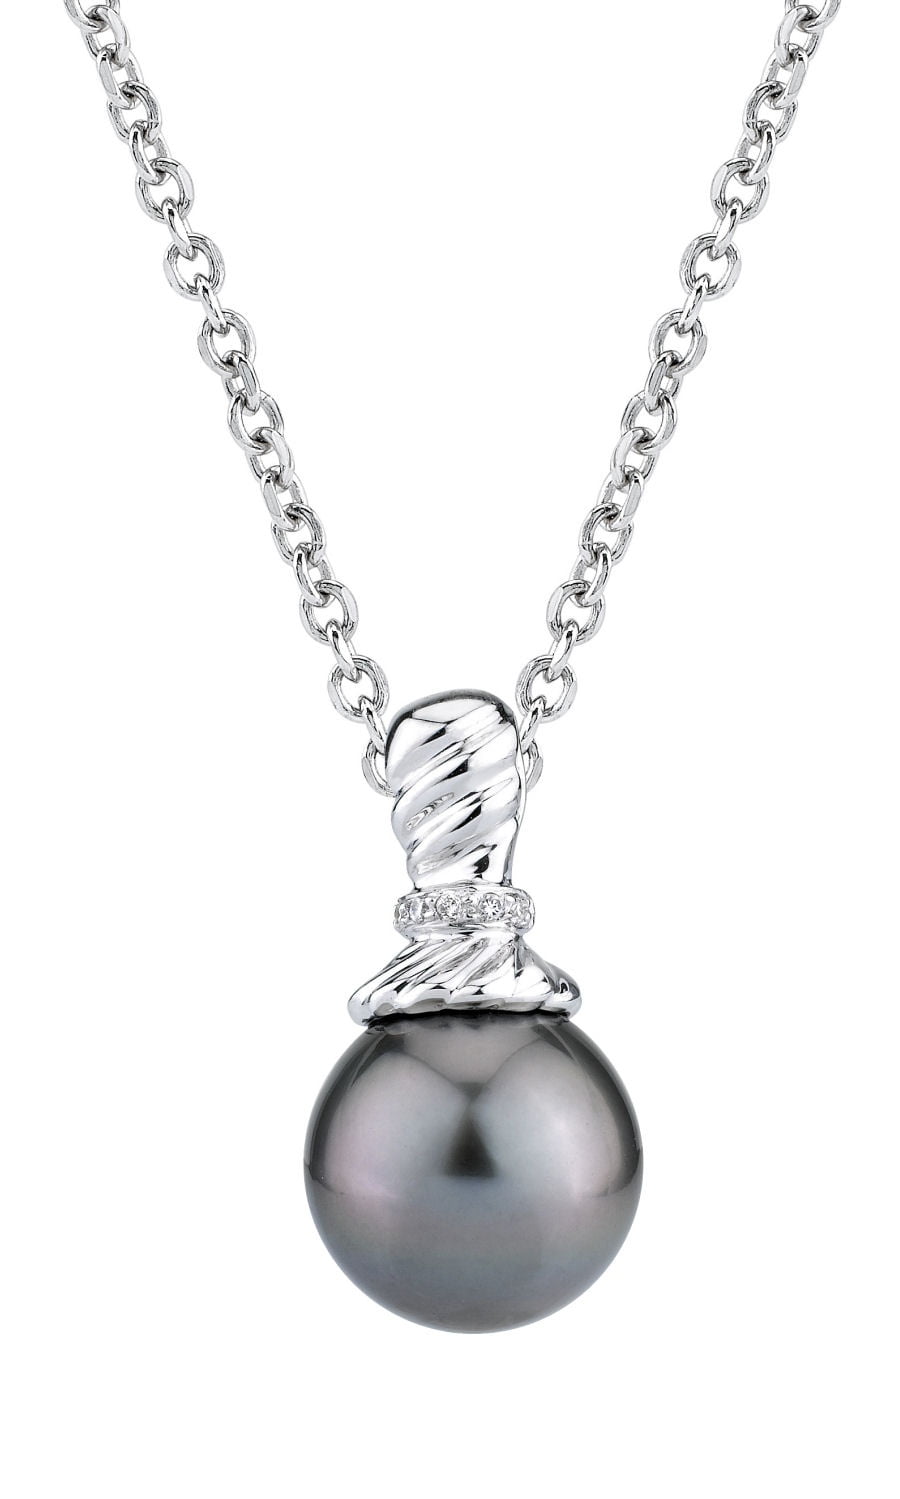 Diamond Necklace Chain South Sea Tahitian Cultured Pearl Pendant Jewelry in 14k Gold or Sterling Silver 